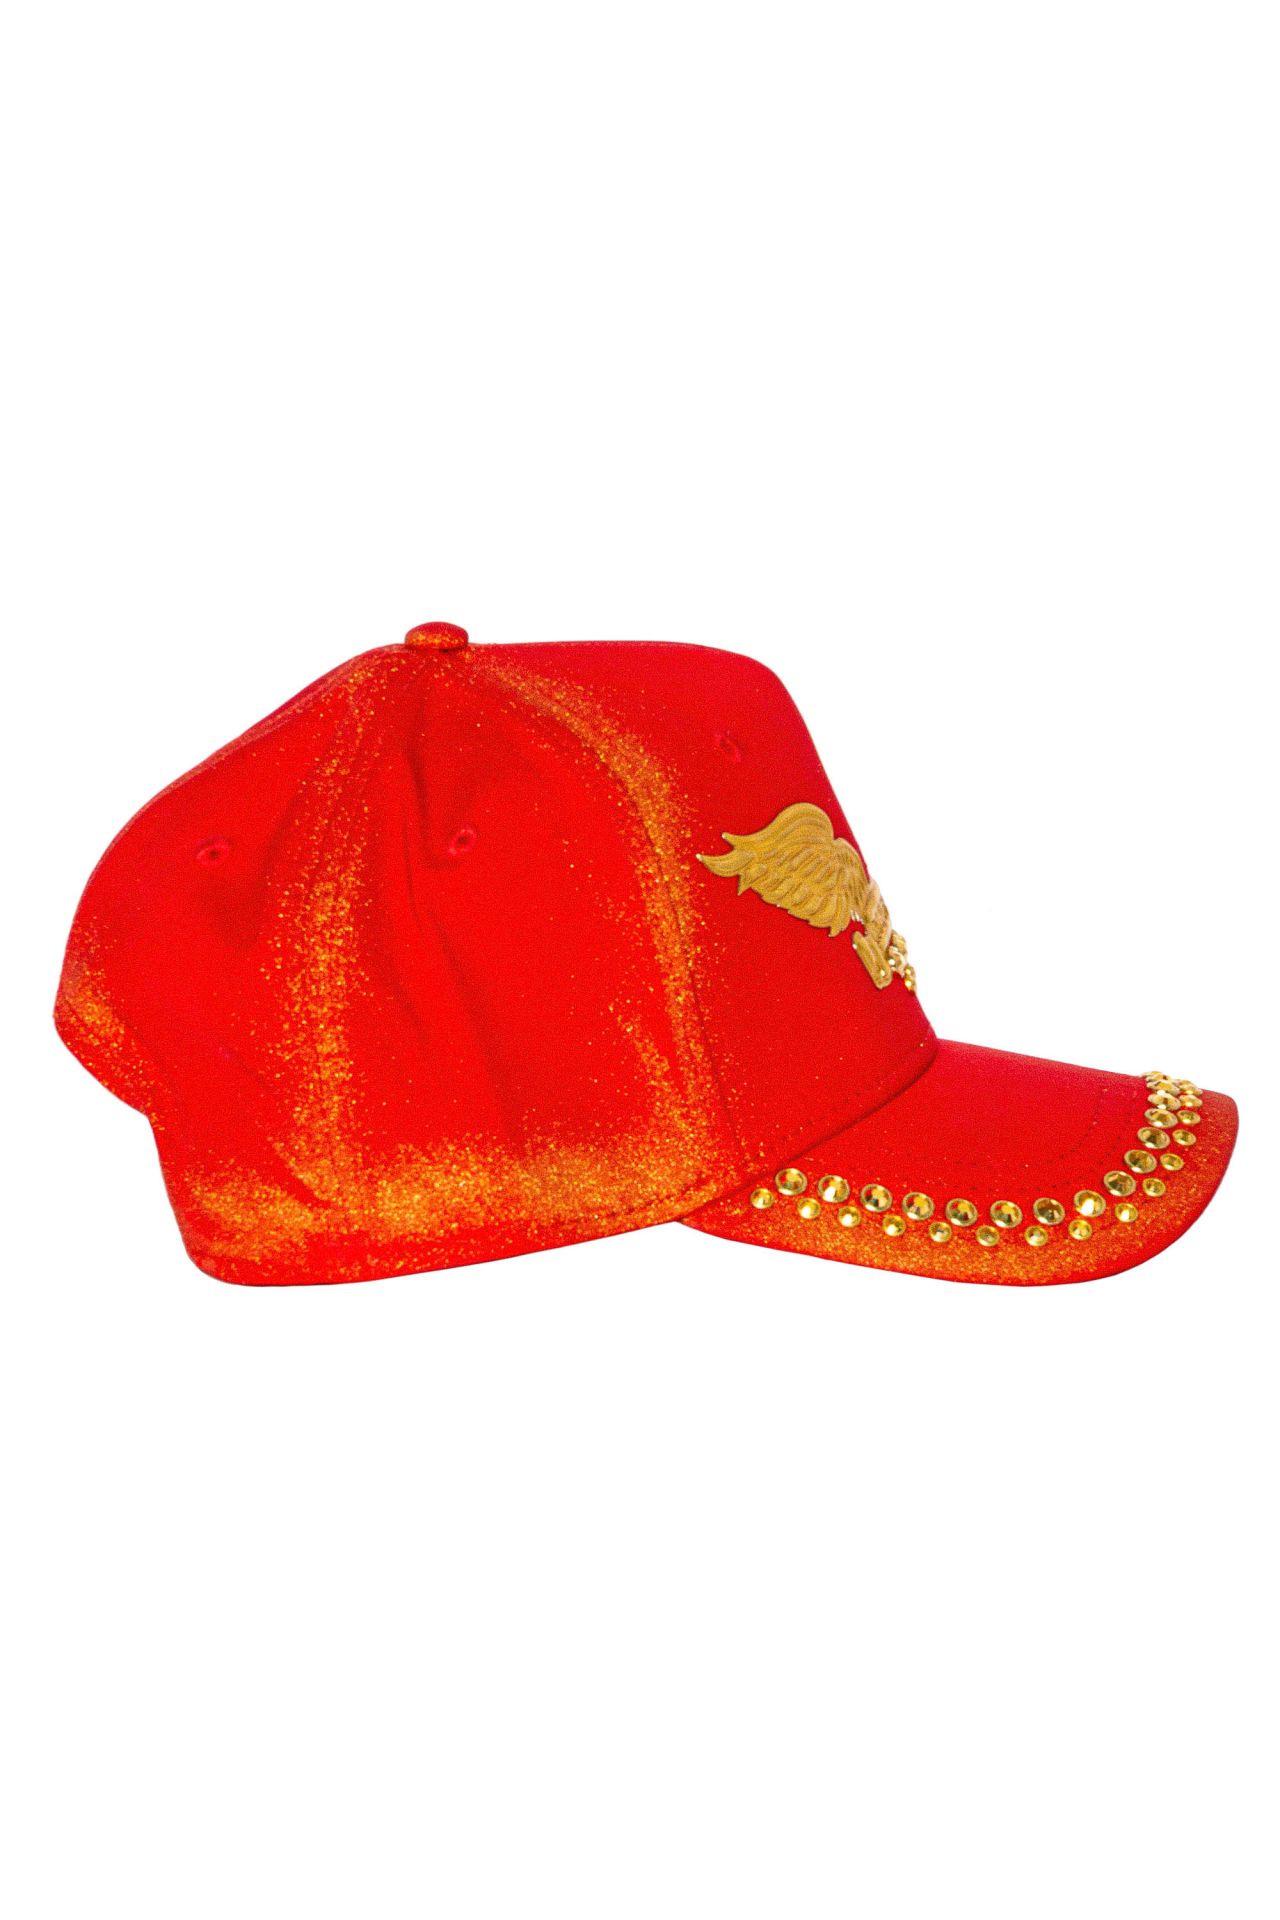 GOLD DUST CAP IN RED WITH GOLD WINGS AND CRYSTALS